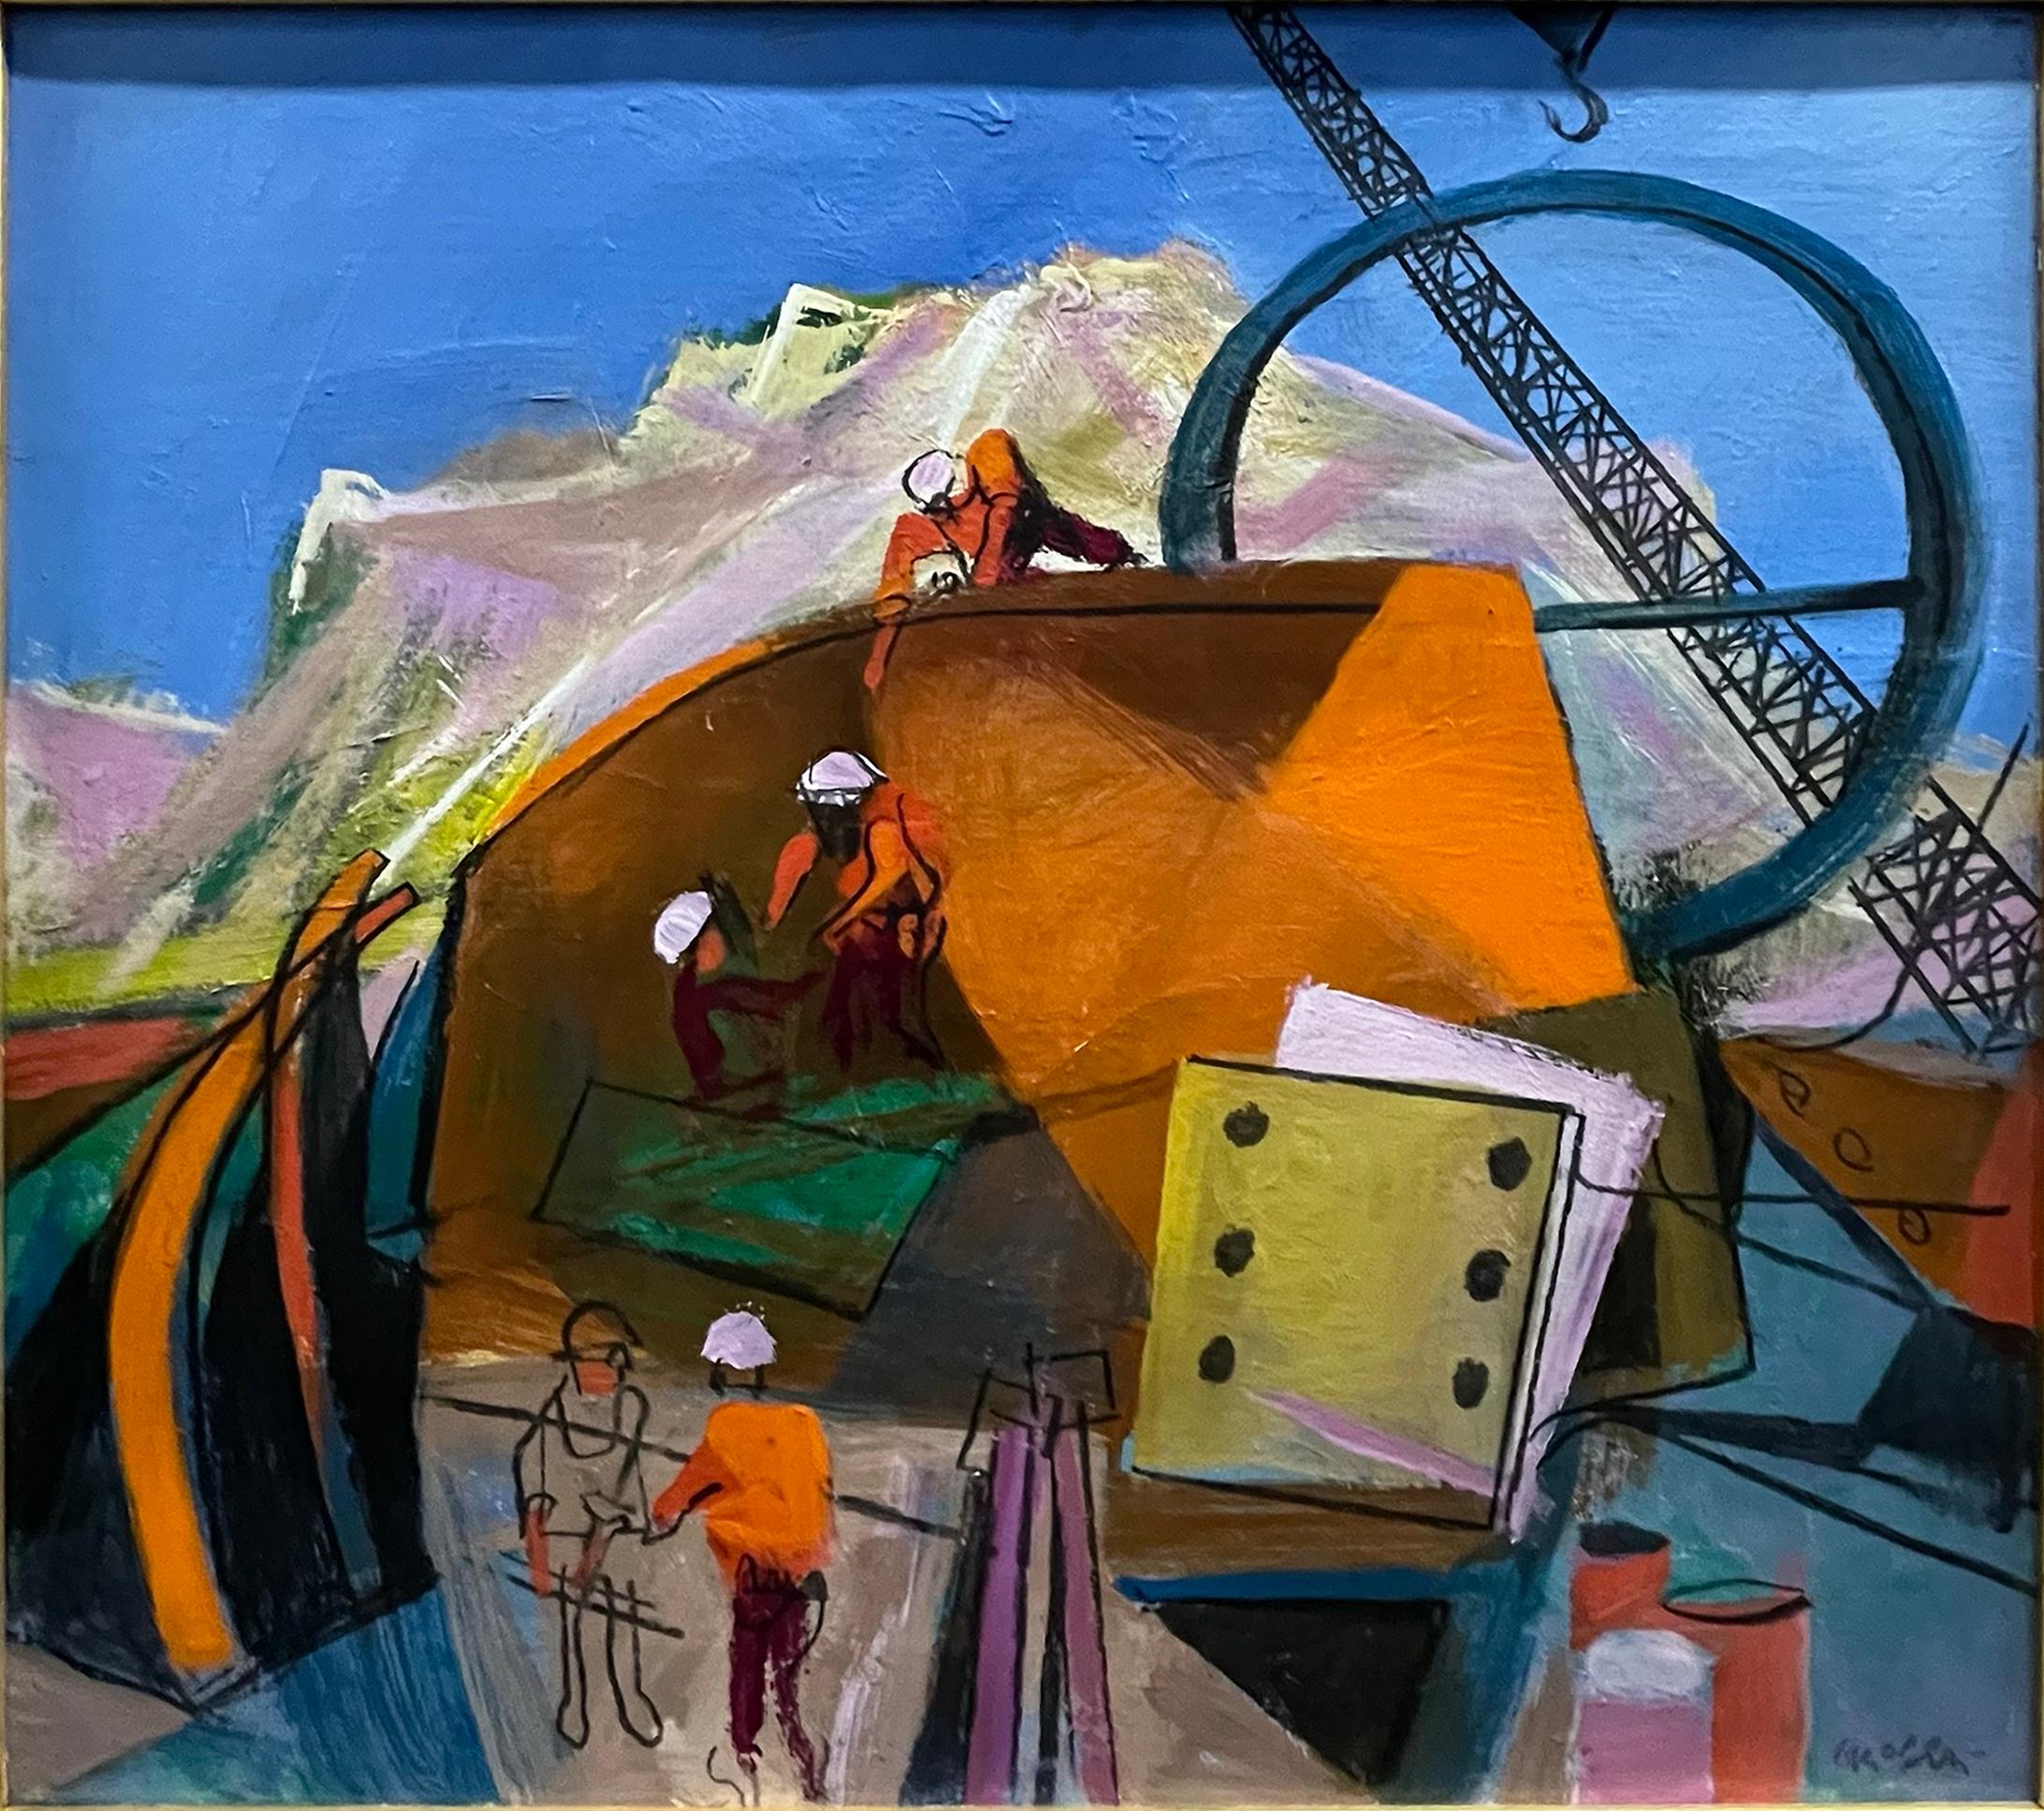 Power Plant Grant Coulee Dam Industrial Mid 20th Century Abstract Realism Modern